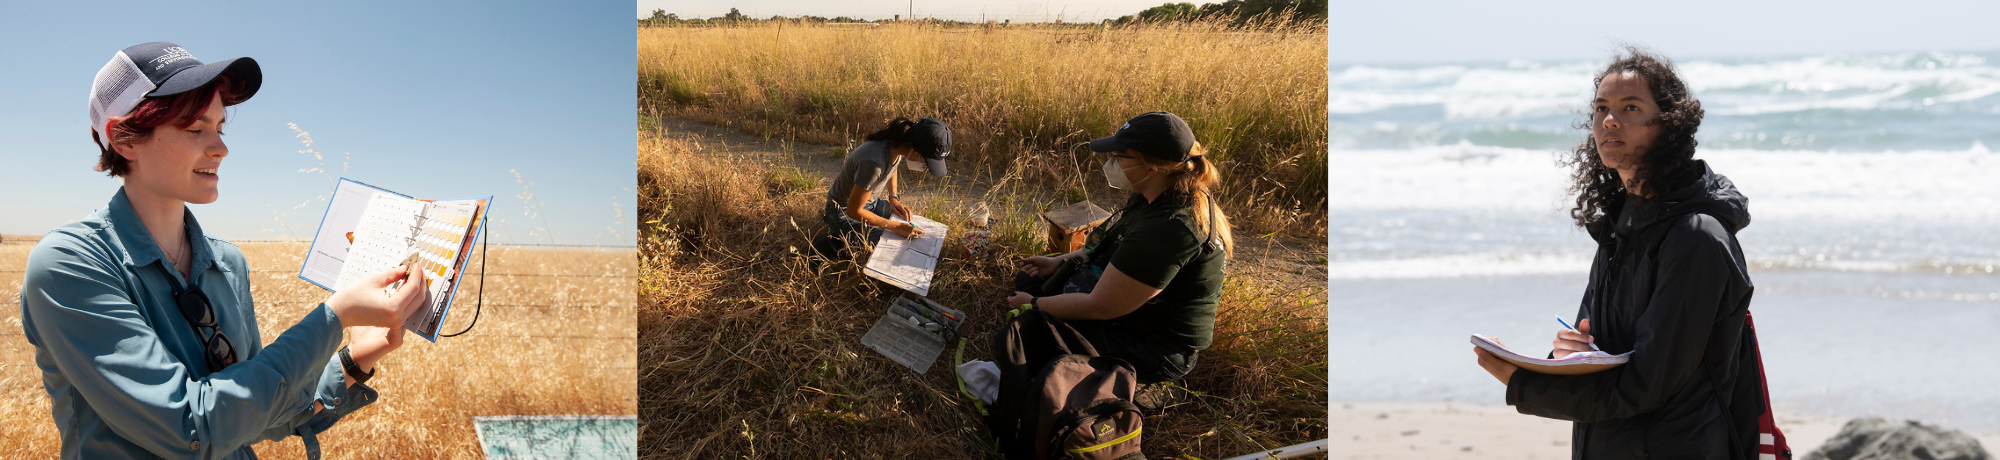 Collage of three images. Left image features a student outside on a field holding up a journal. Middle photo shows two students in a field writing in their books. The right photo shows a woman looking to the distance while writing on a piece of paper in front of an ocean.